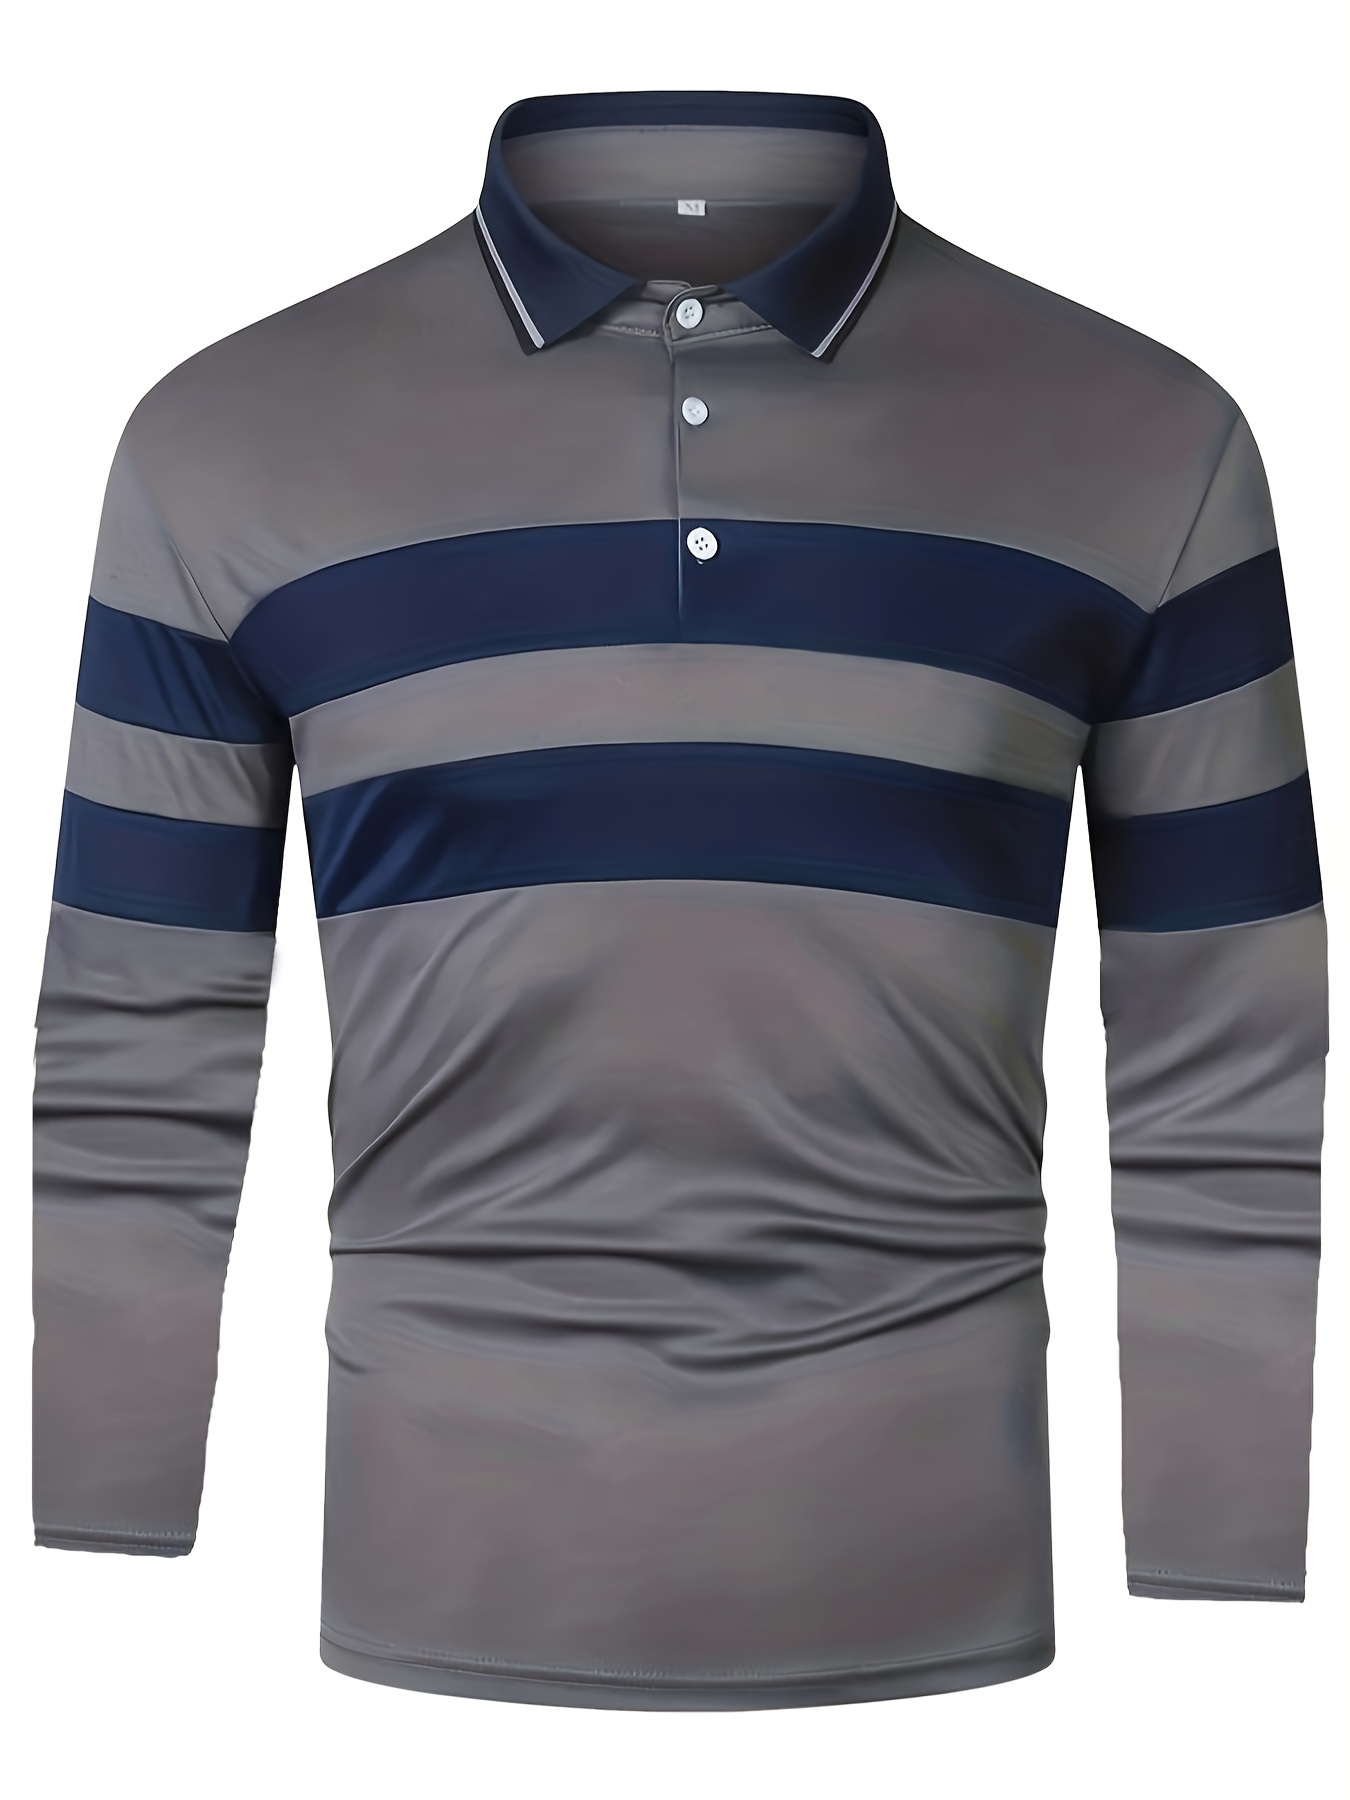 Blue and Grey Striped Long Sleeve